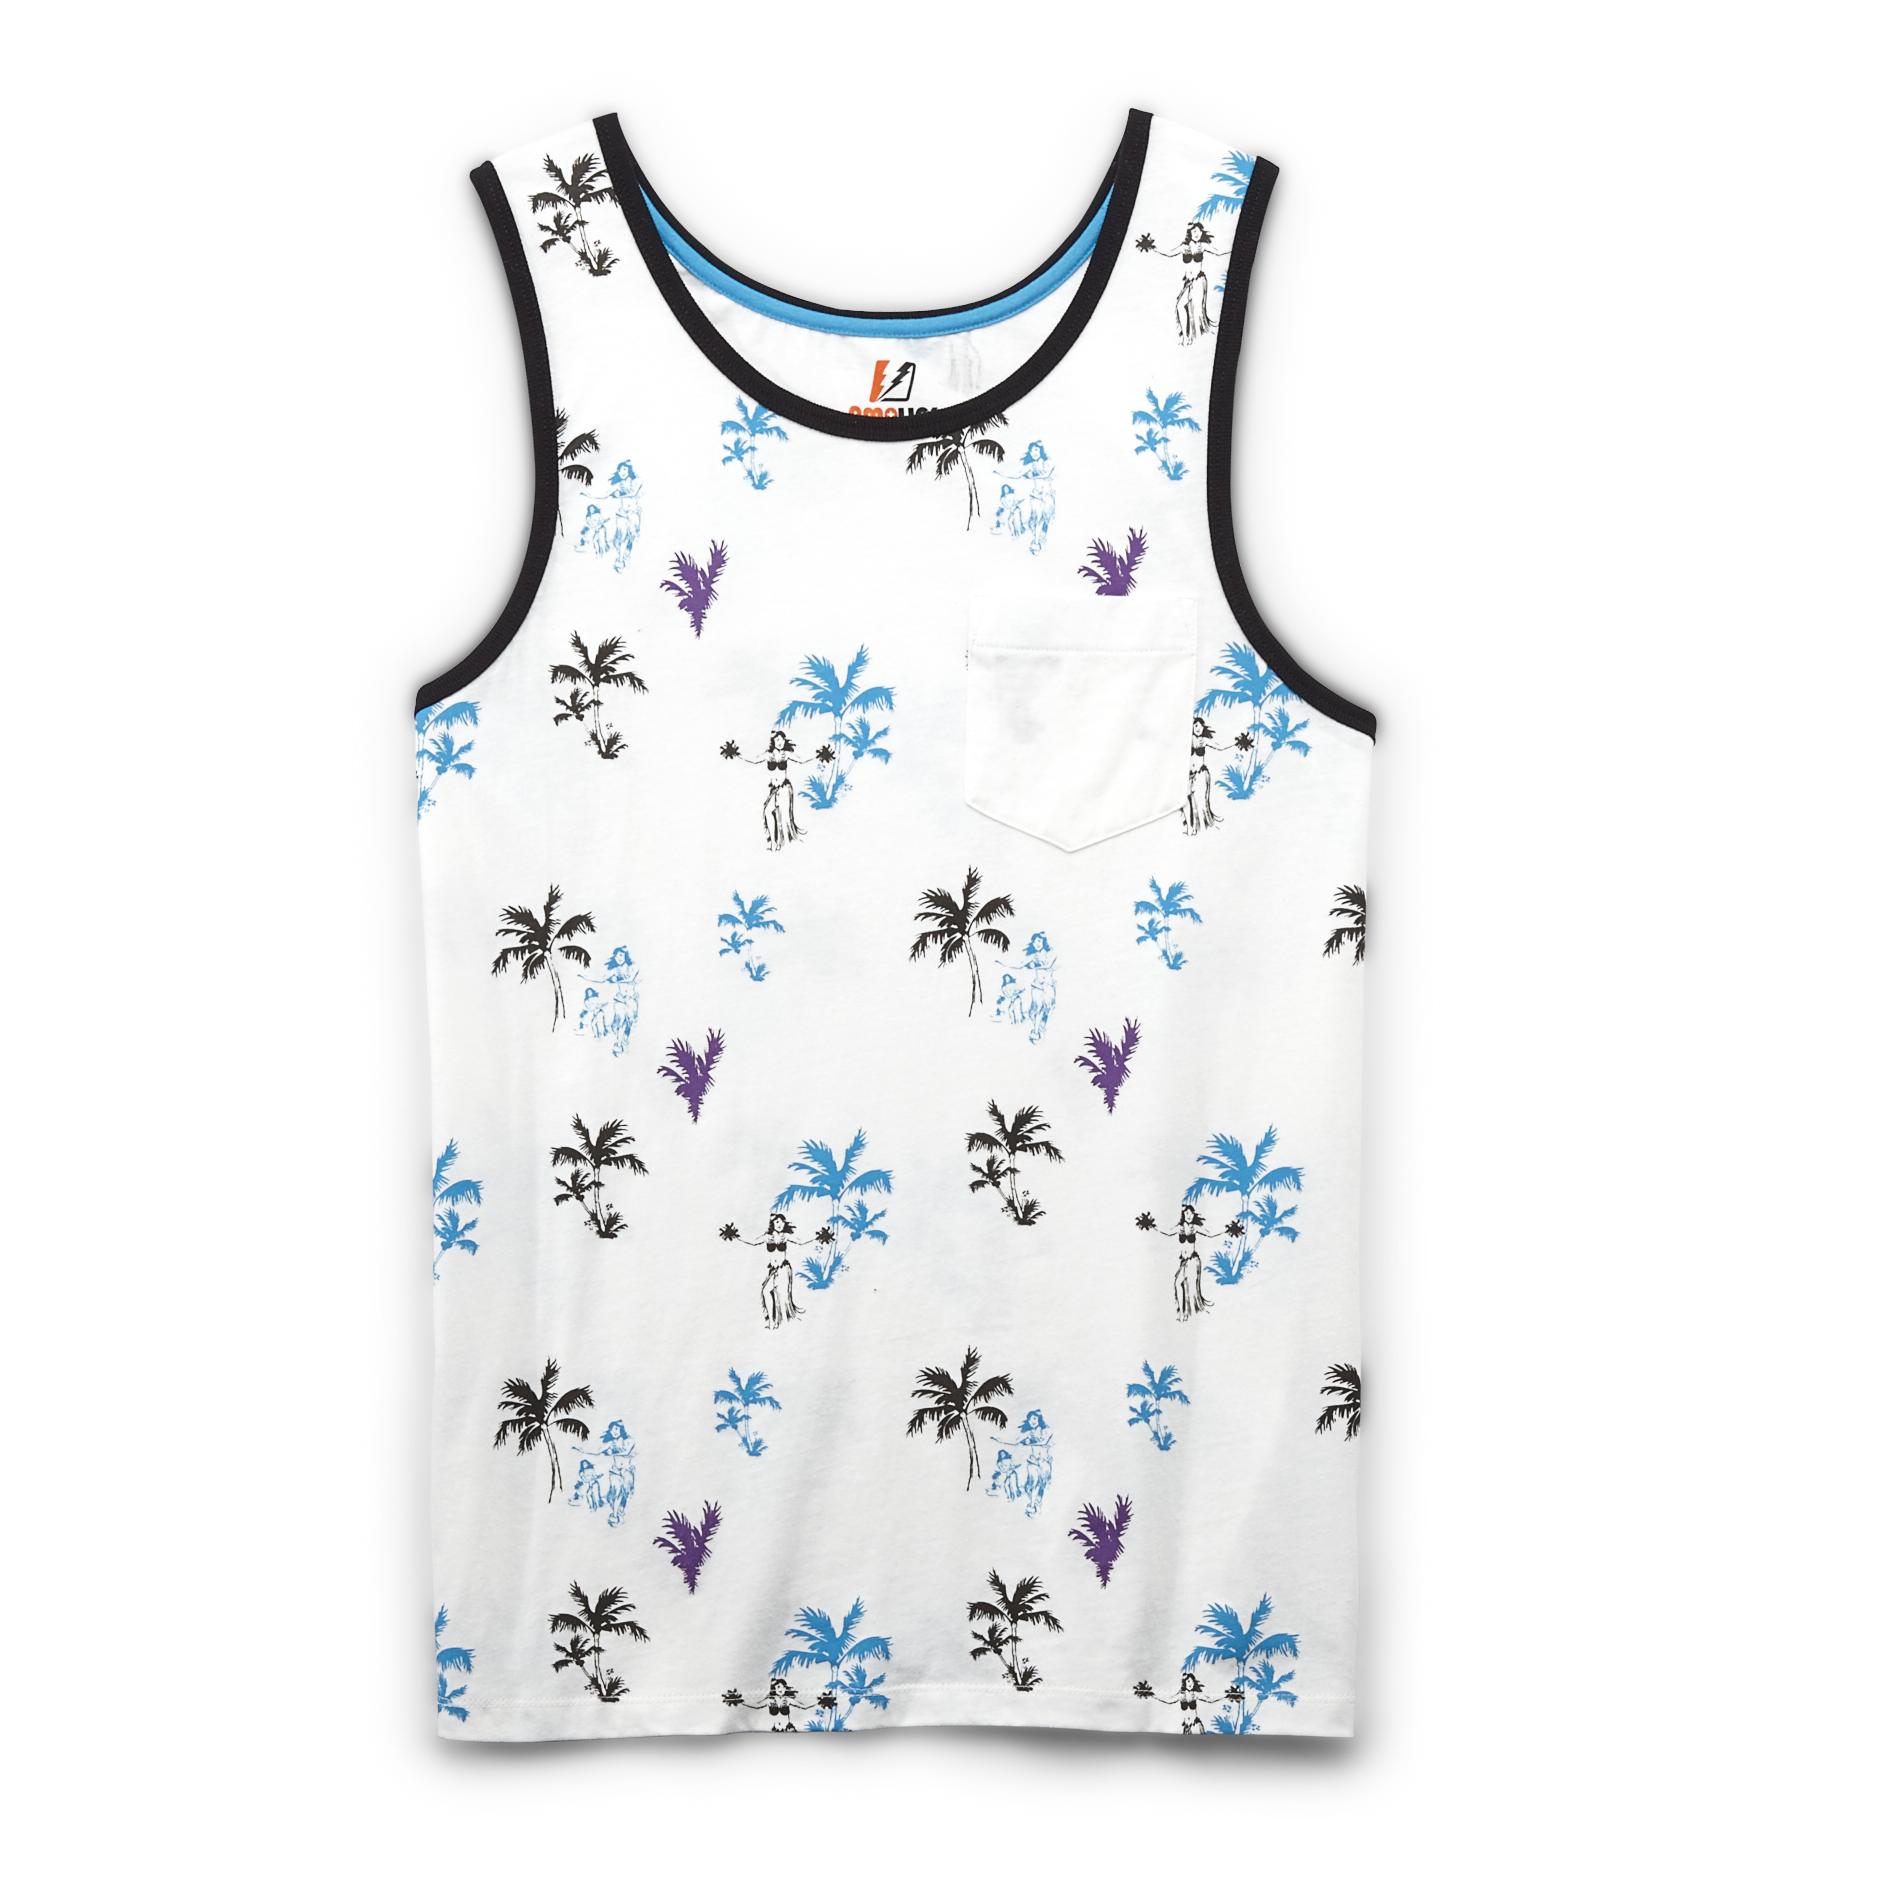 Amplify Young Men's Pocket Tank Top - Palm Trees